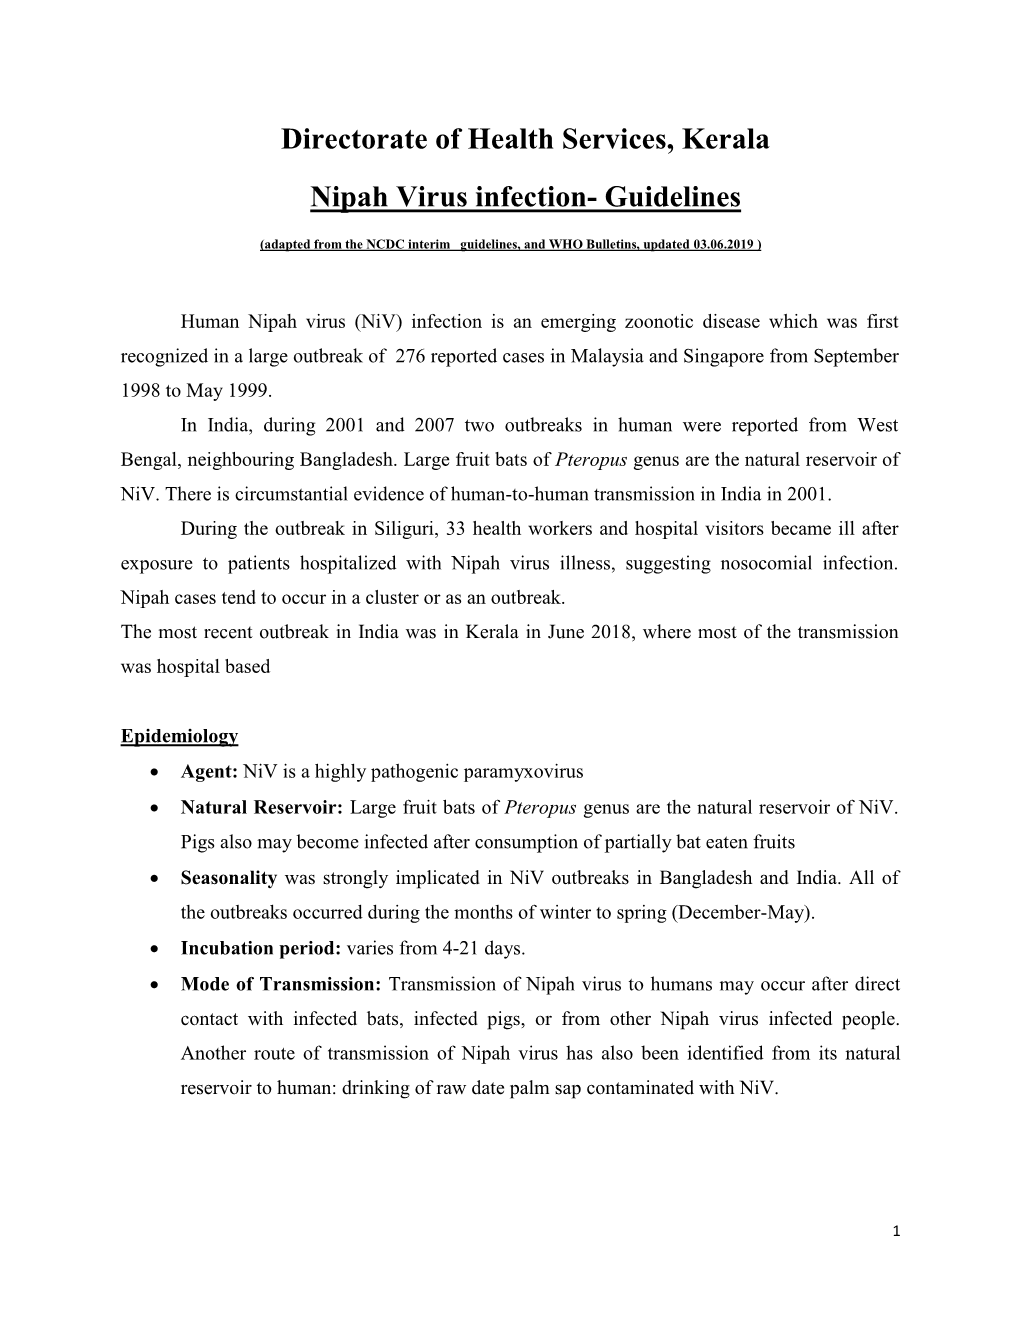 Directorate of Health Services, Kerala Nipah Virus Infection- Guidelines